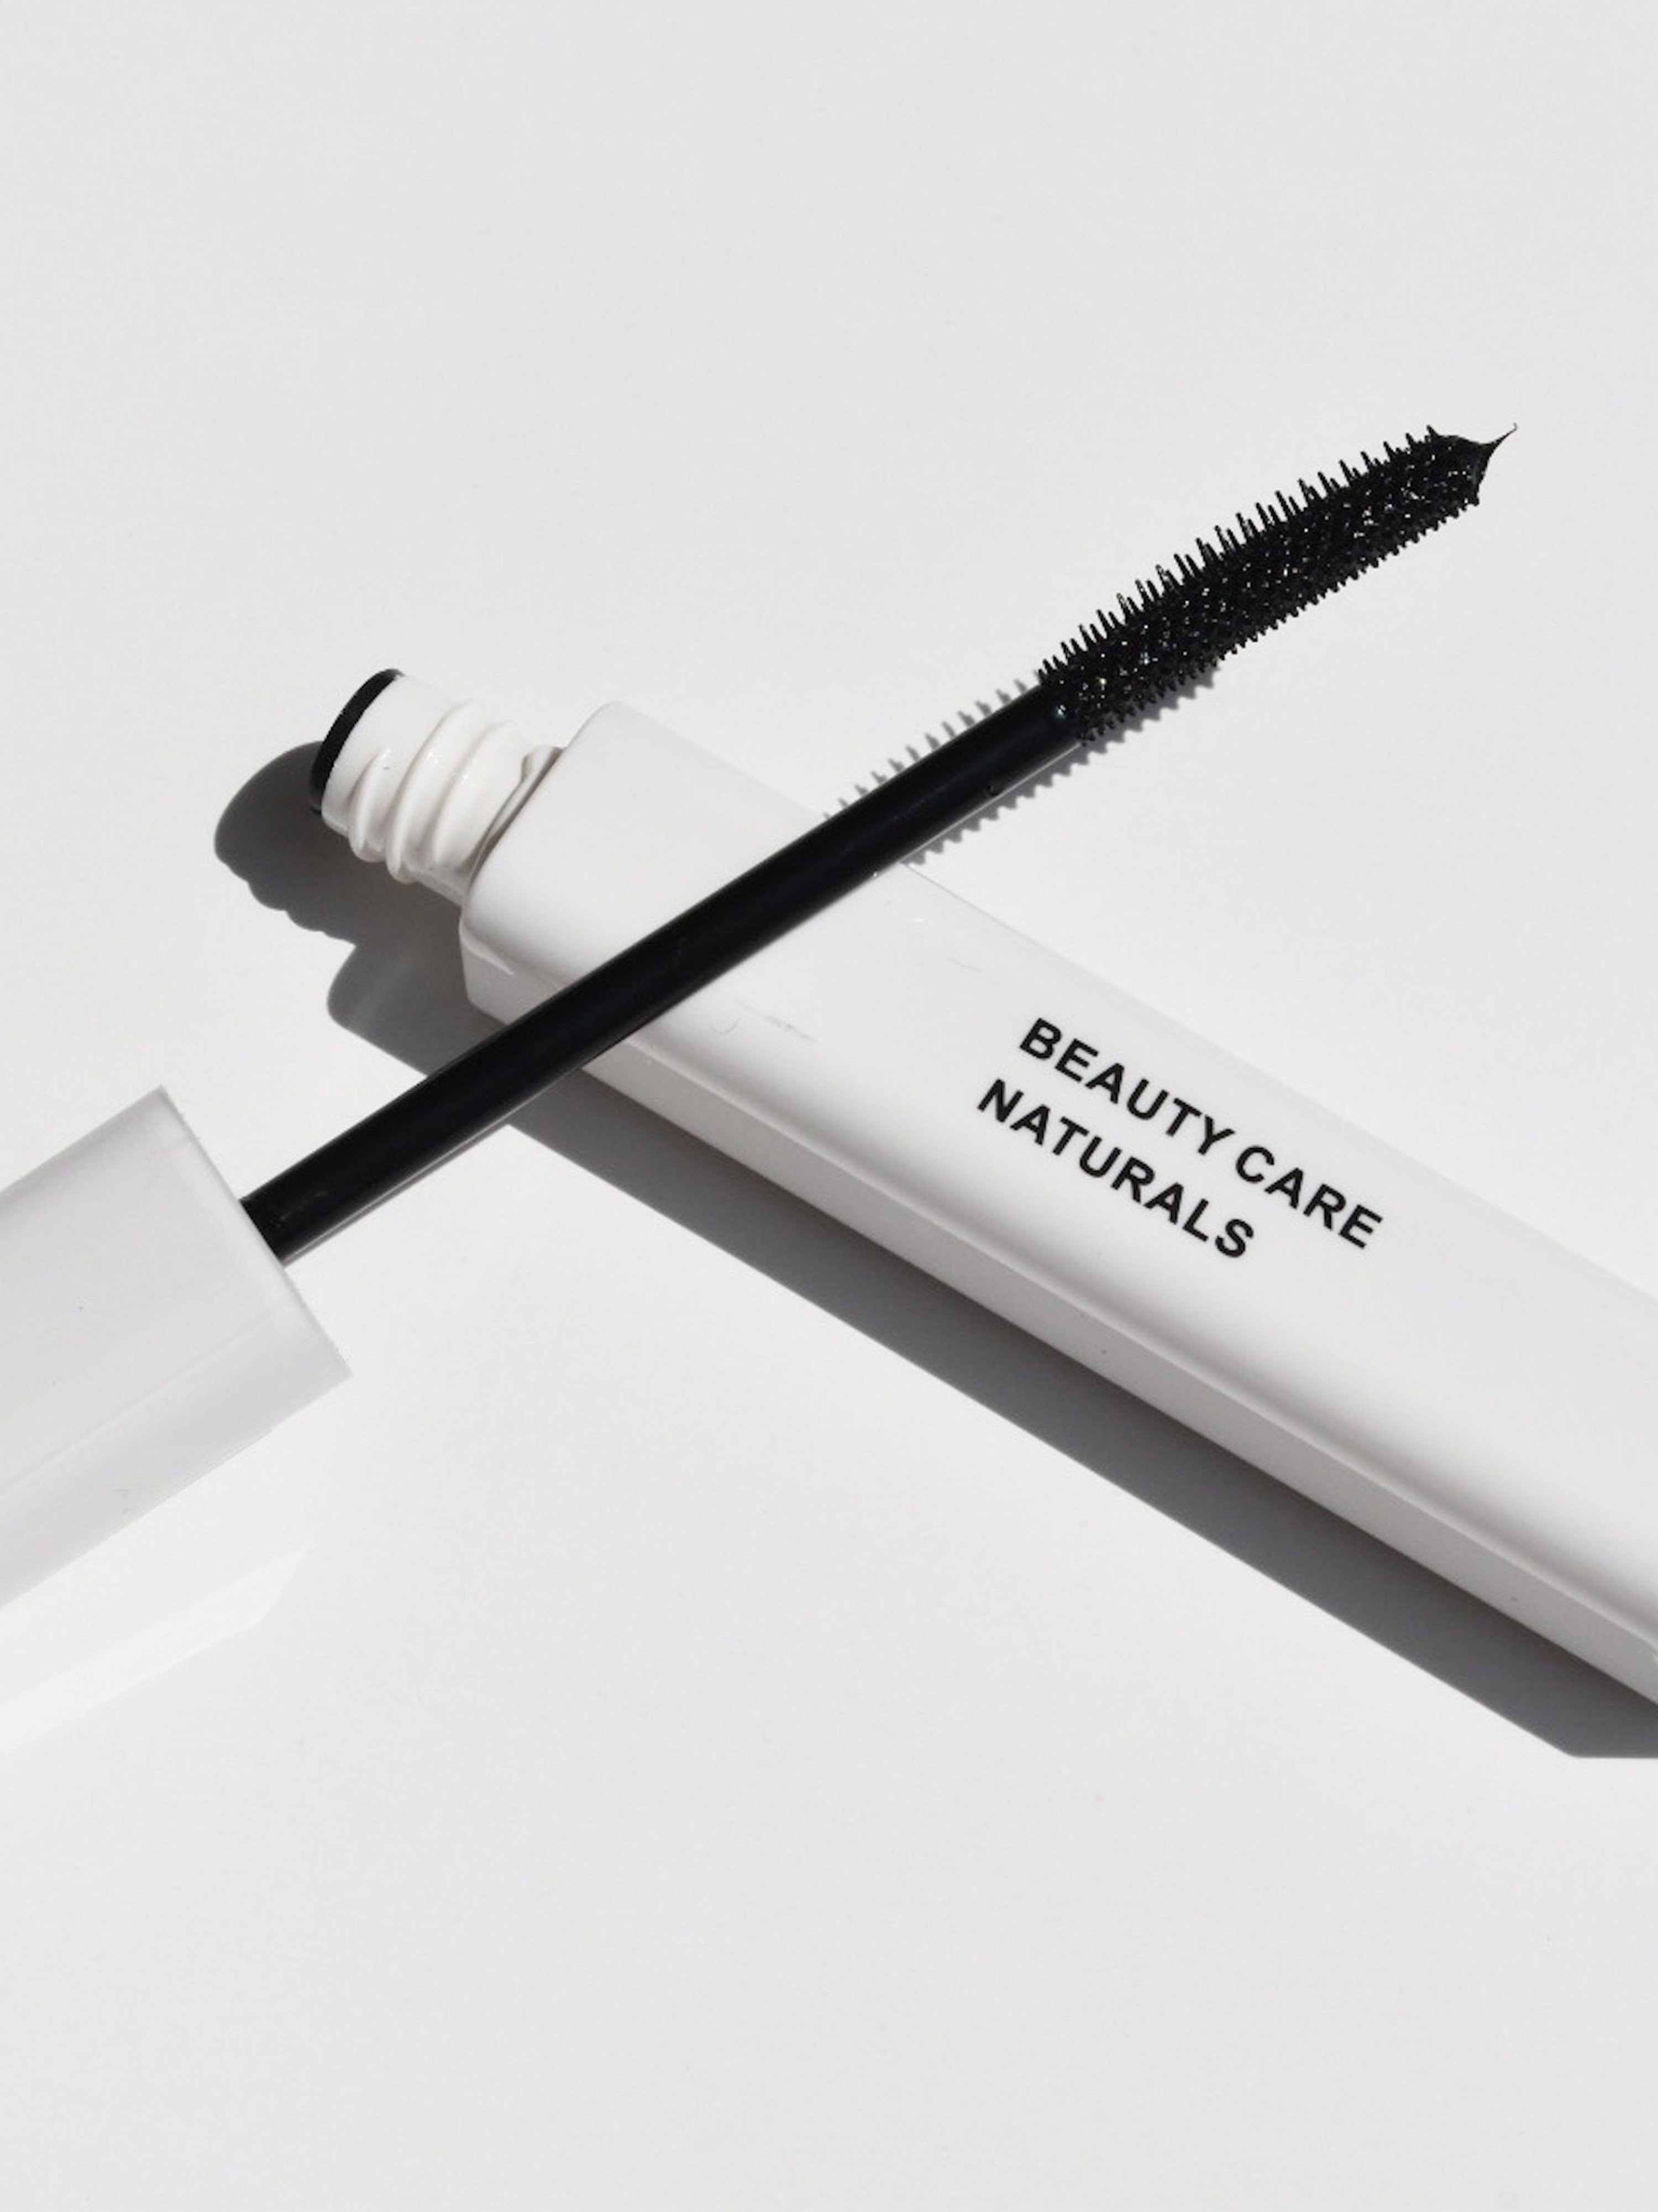 Beauty Care Naturals Lengthening Mascara In Black